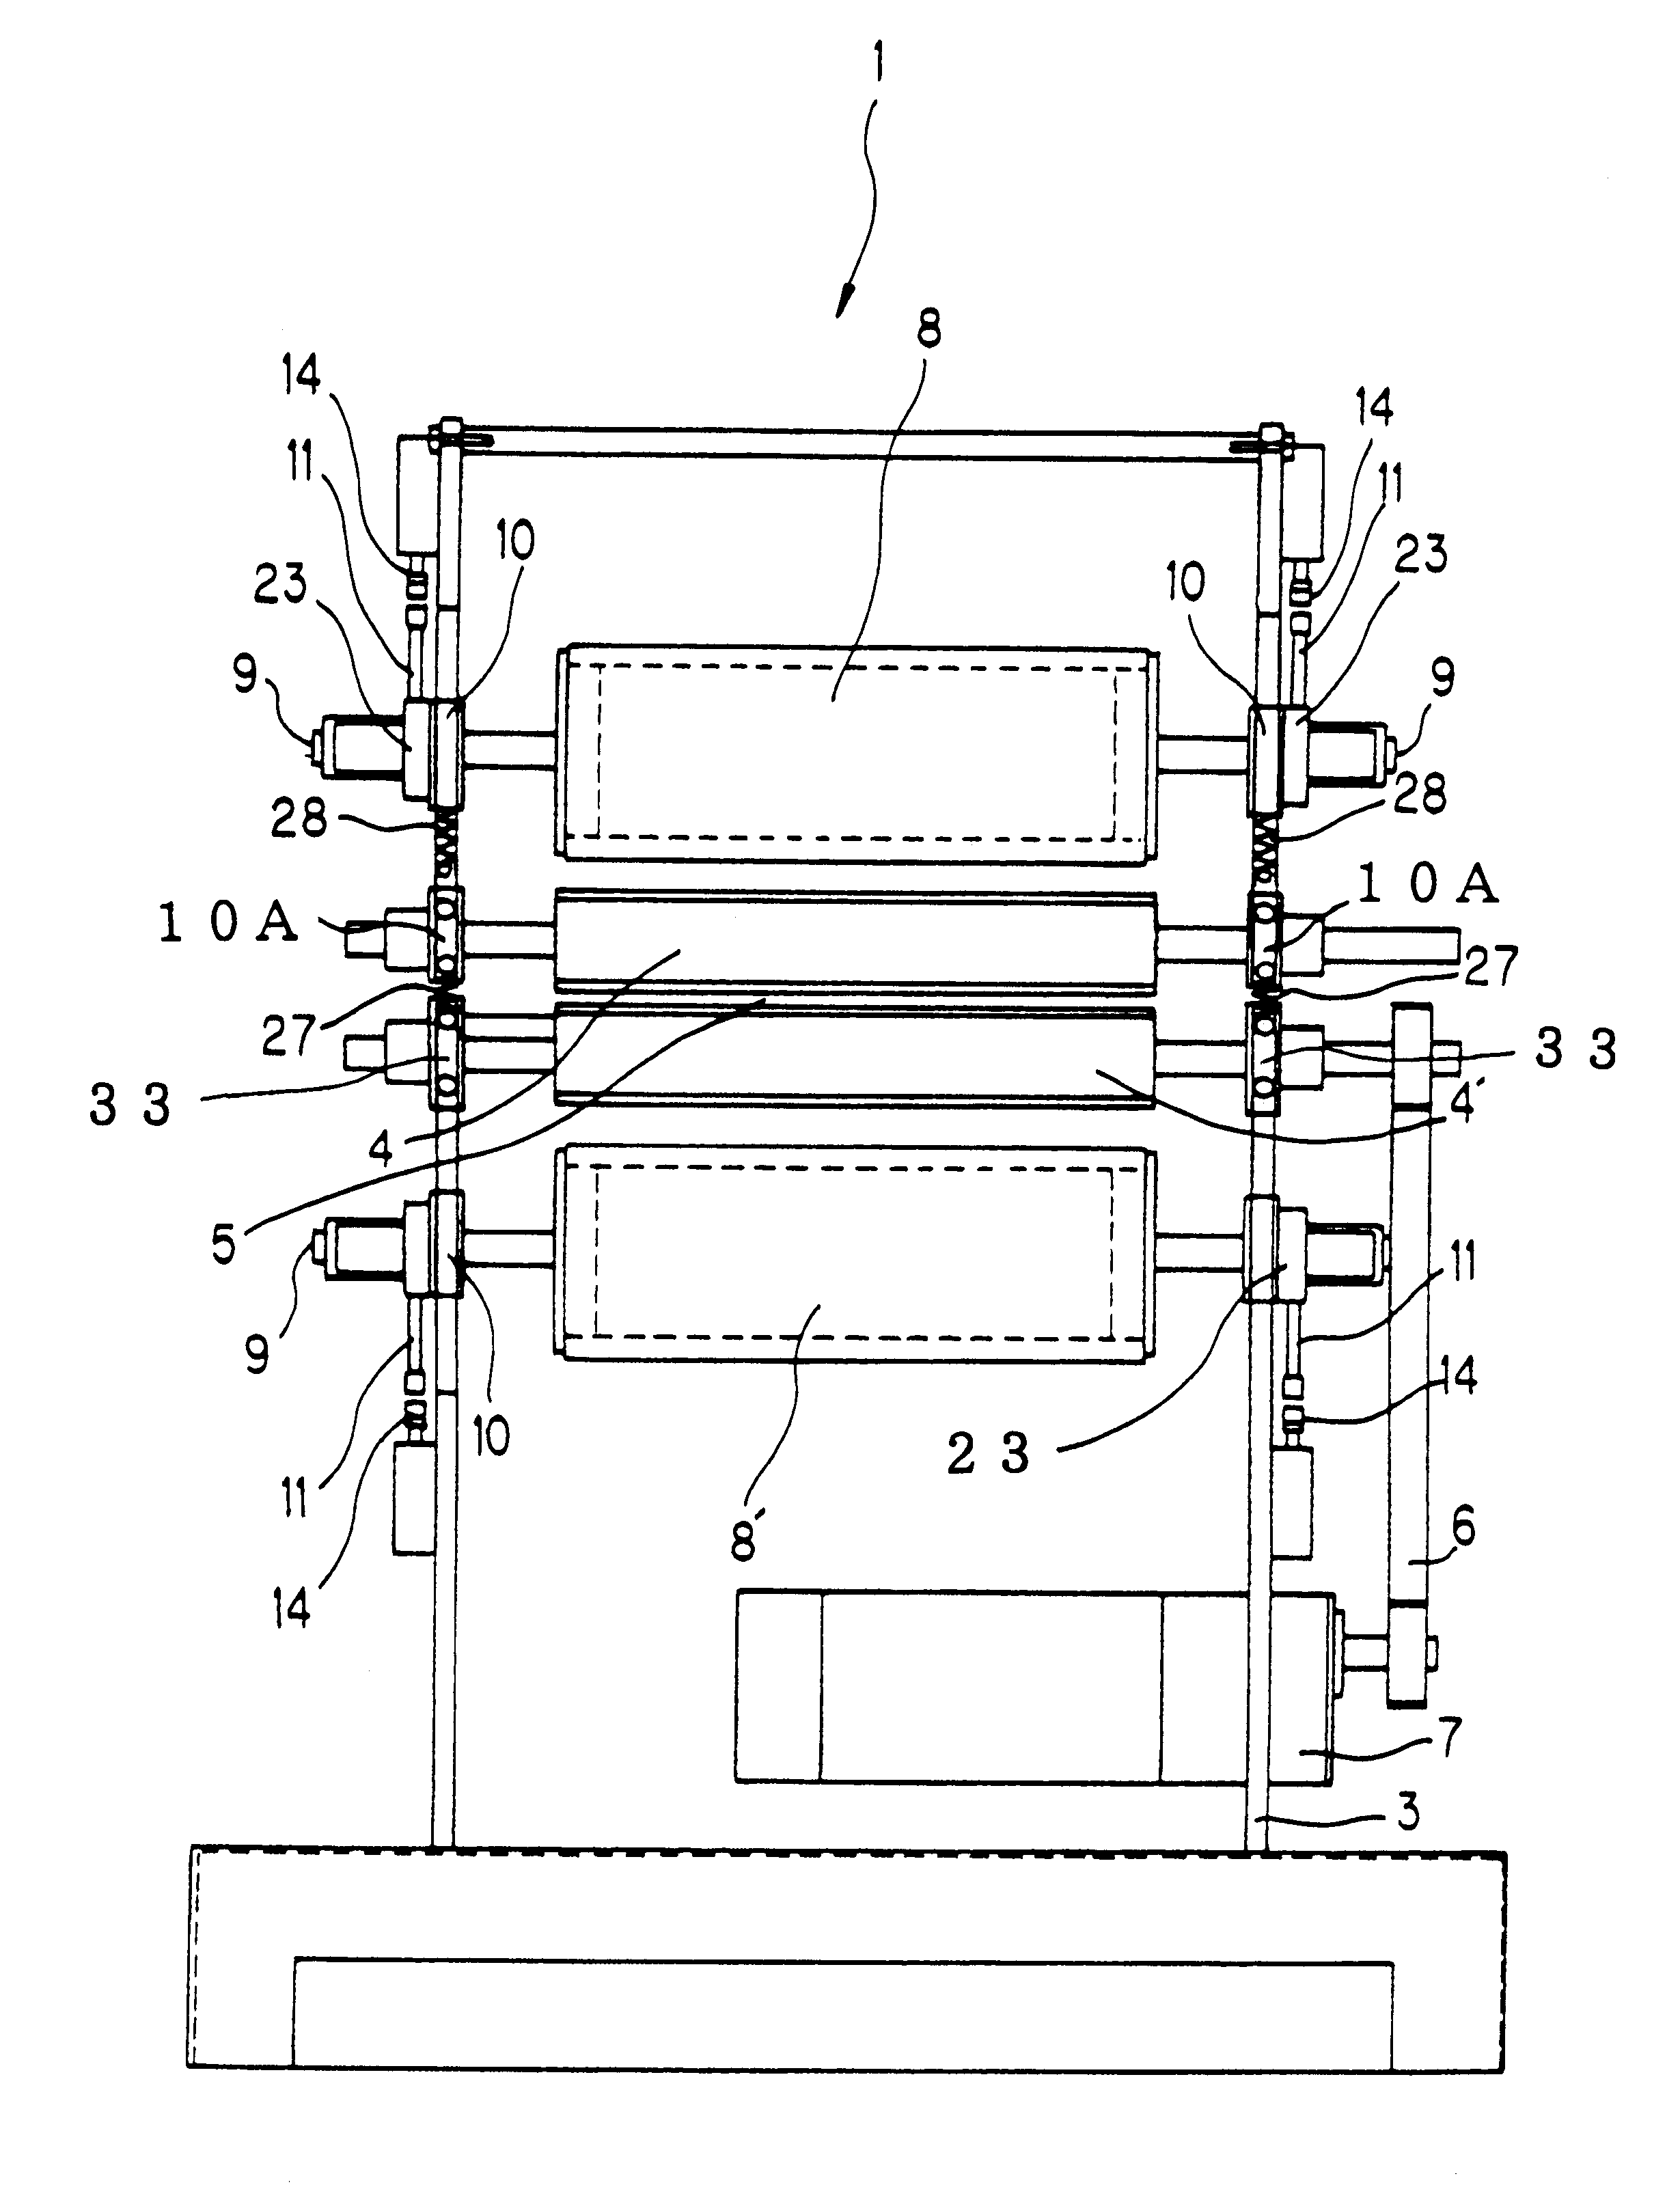 Substrate or sheet surface cleaning apparatus